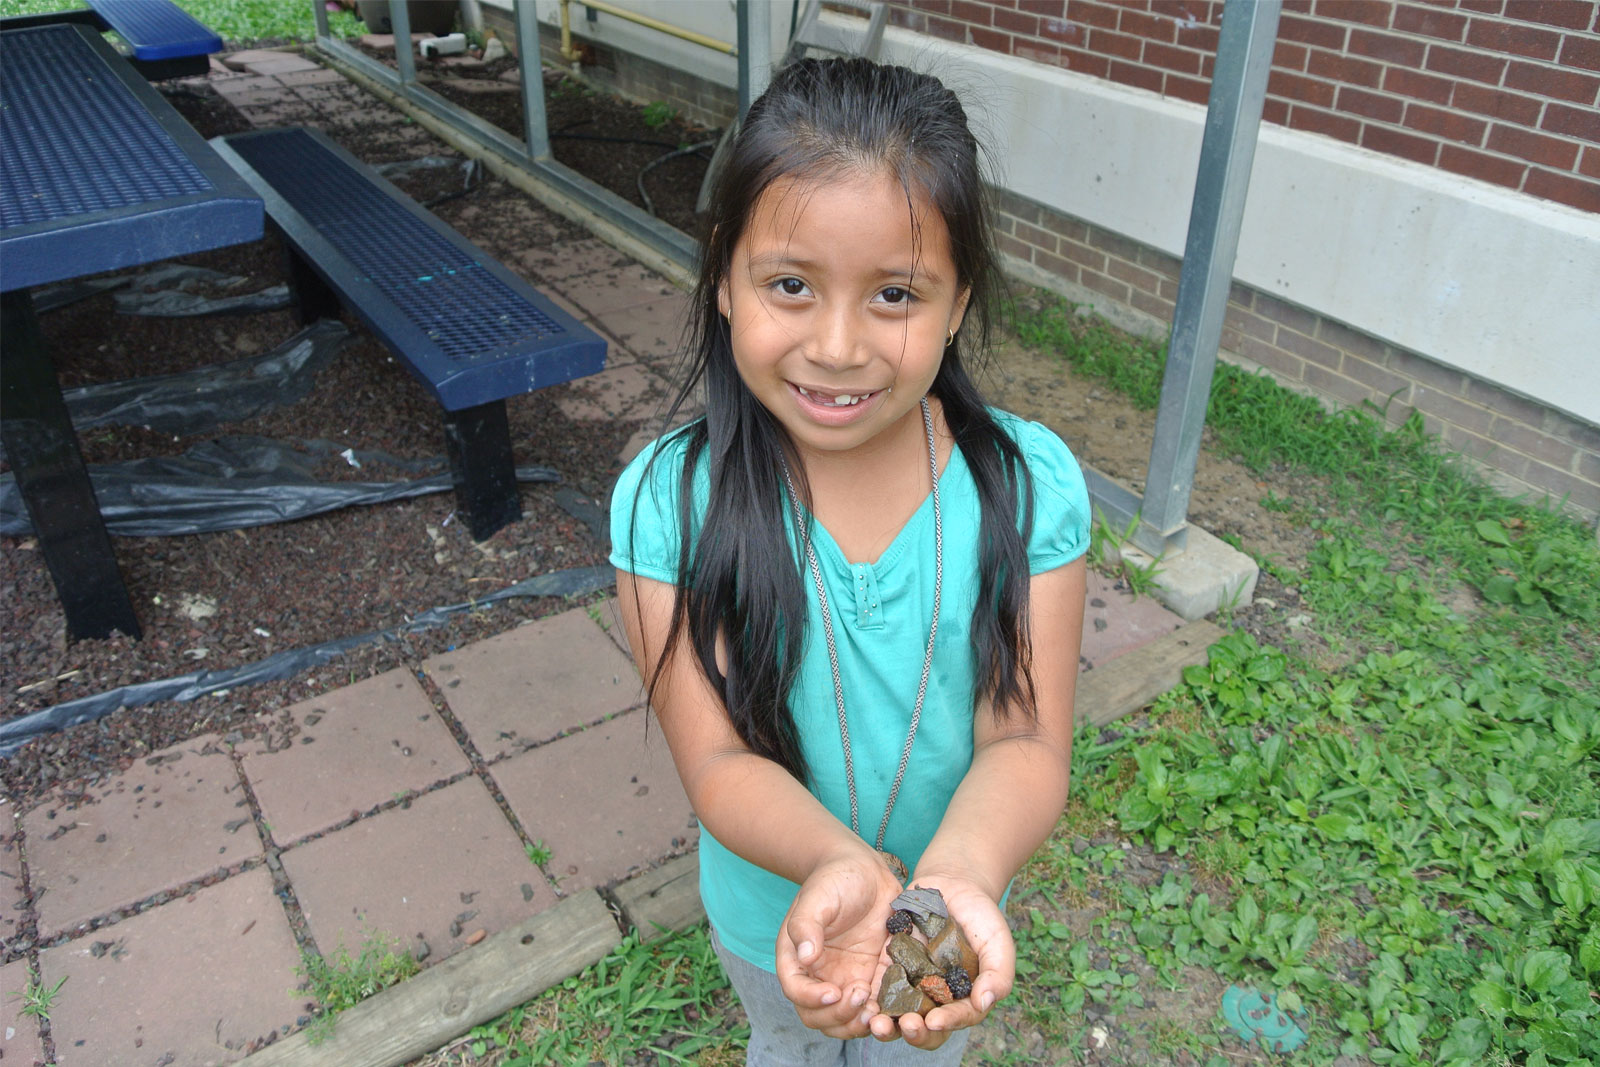 A young student holds rocks in her hands